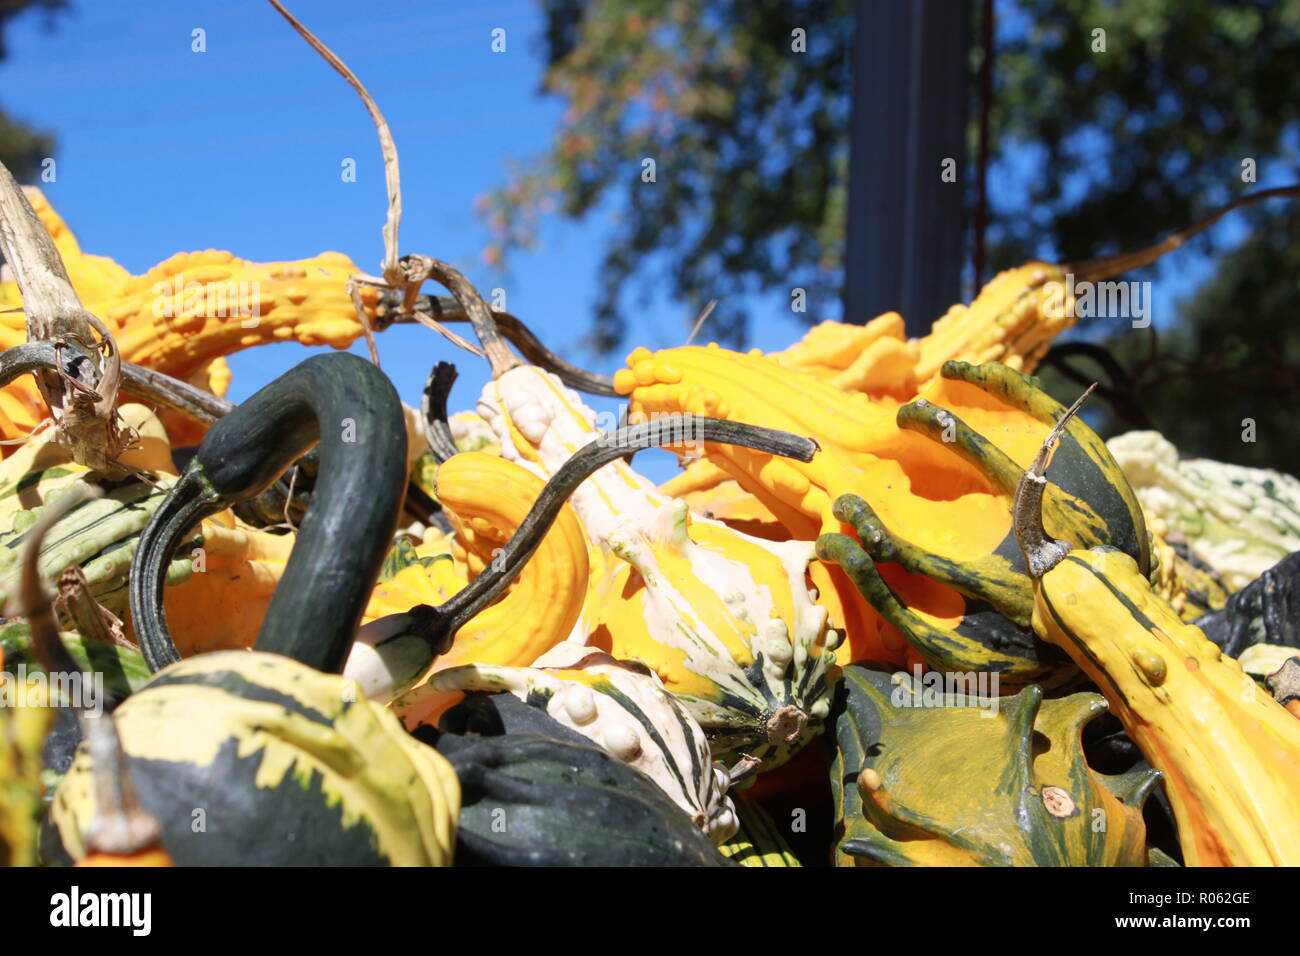 Gourds waiting to be chosen at a very popular pumpkin patch called Hawk's Pumpkin Patch in Winston-Salem, NC. Stock Photo